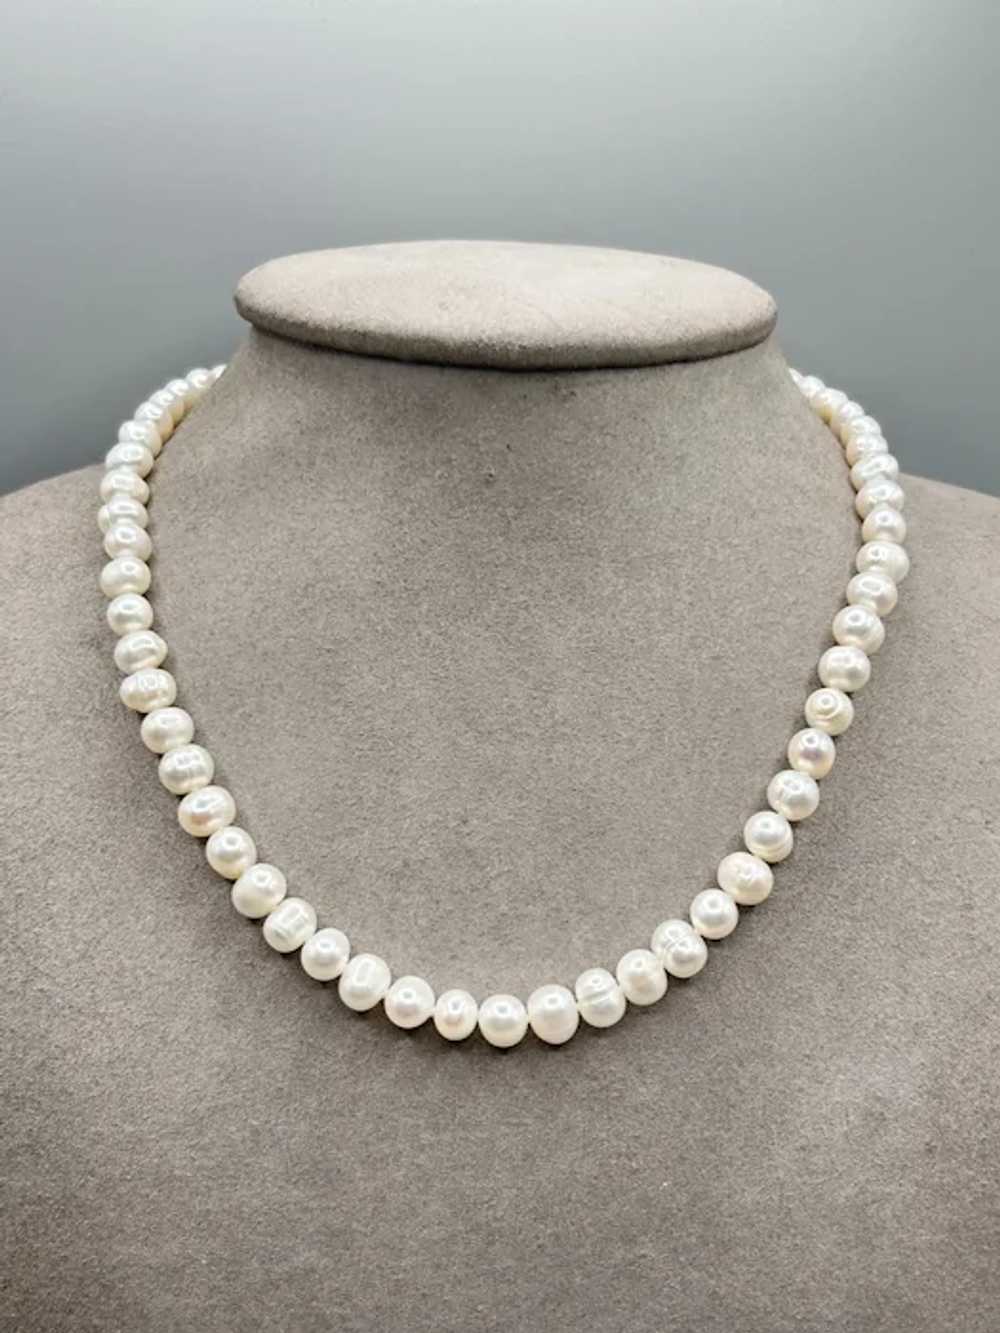 Beaded Genuine Pearls Necklace Hand Knotted Irreg… - image 3